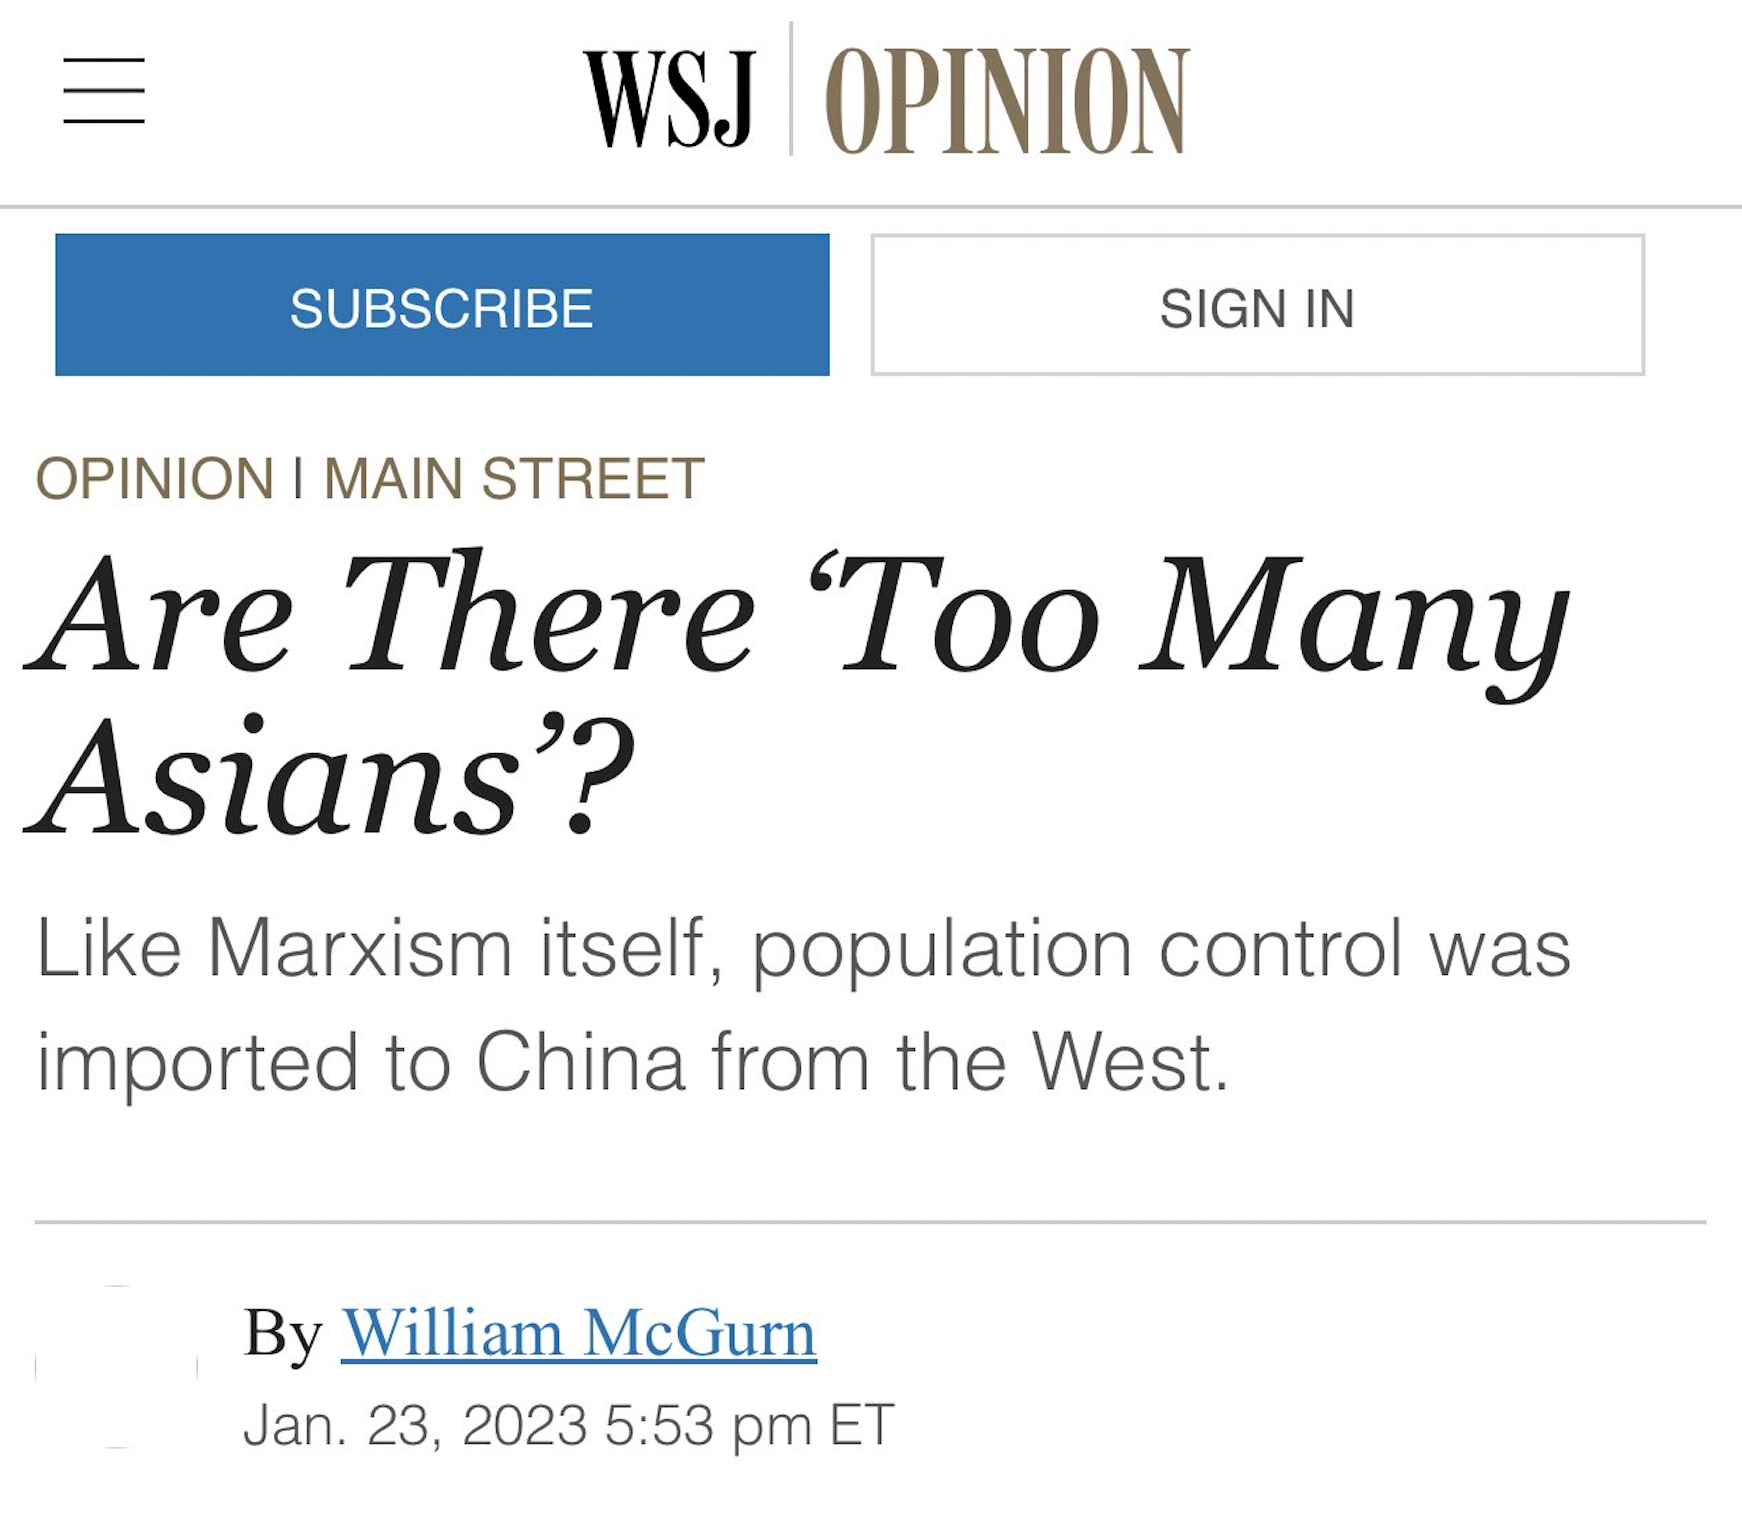 screenshot - Subscribe Wsj Opinion Sign In Opinion I Main Street Are There 'Too Many Asians'? Marxism itself, population control was imported to China from the West. By William McGurn Jan. 23, 2023 Et